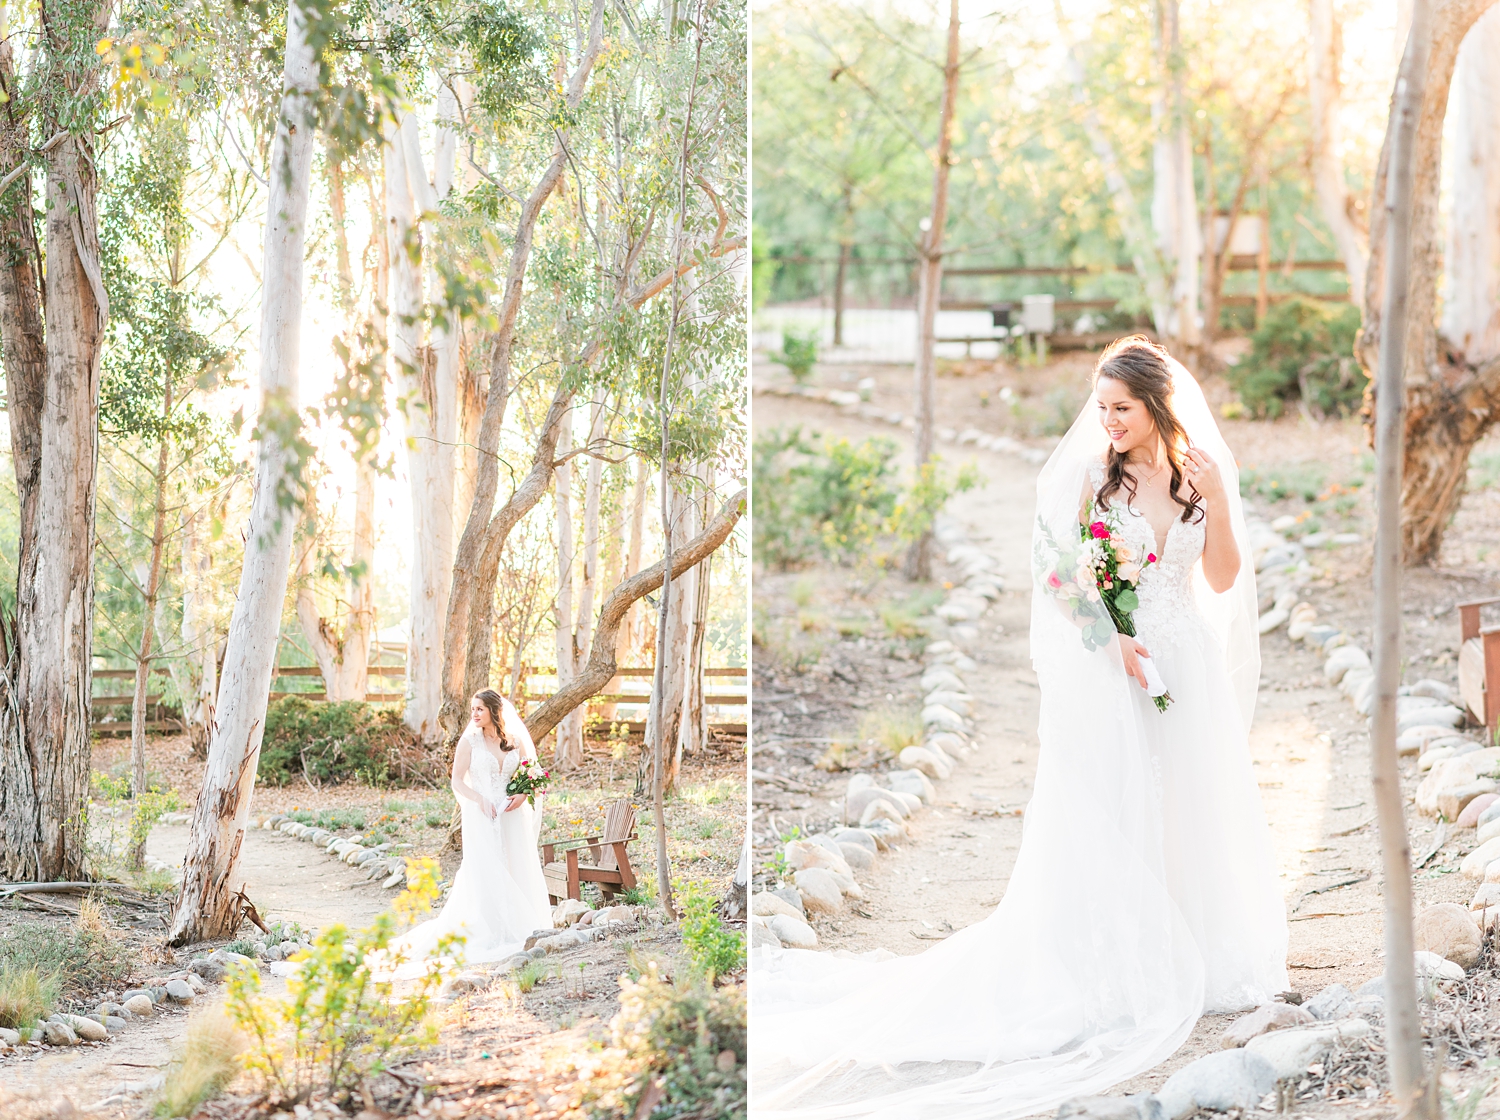 Bridal Session in a winery in temecula from a Temecula Wedding Photographer_0014.jpg